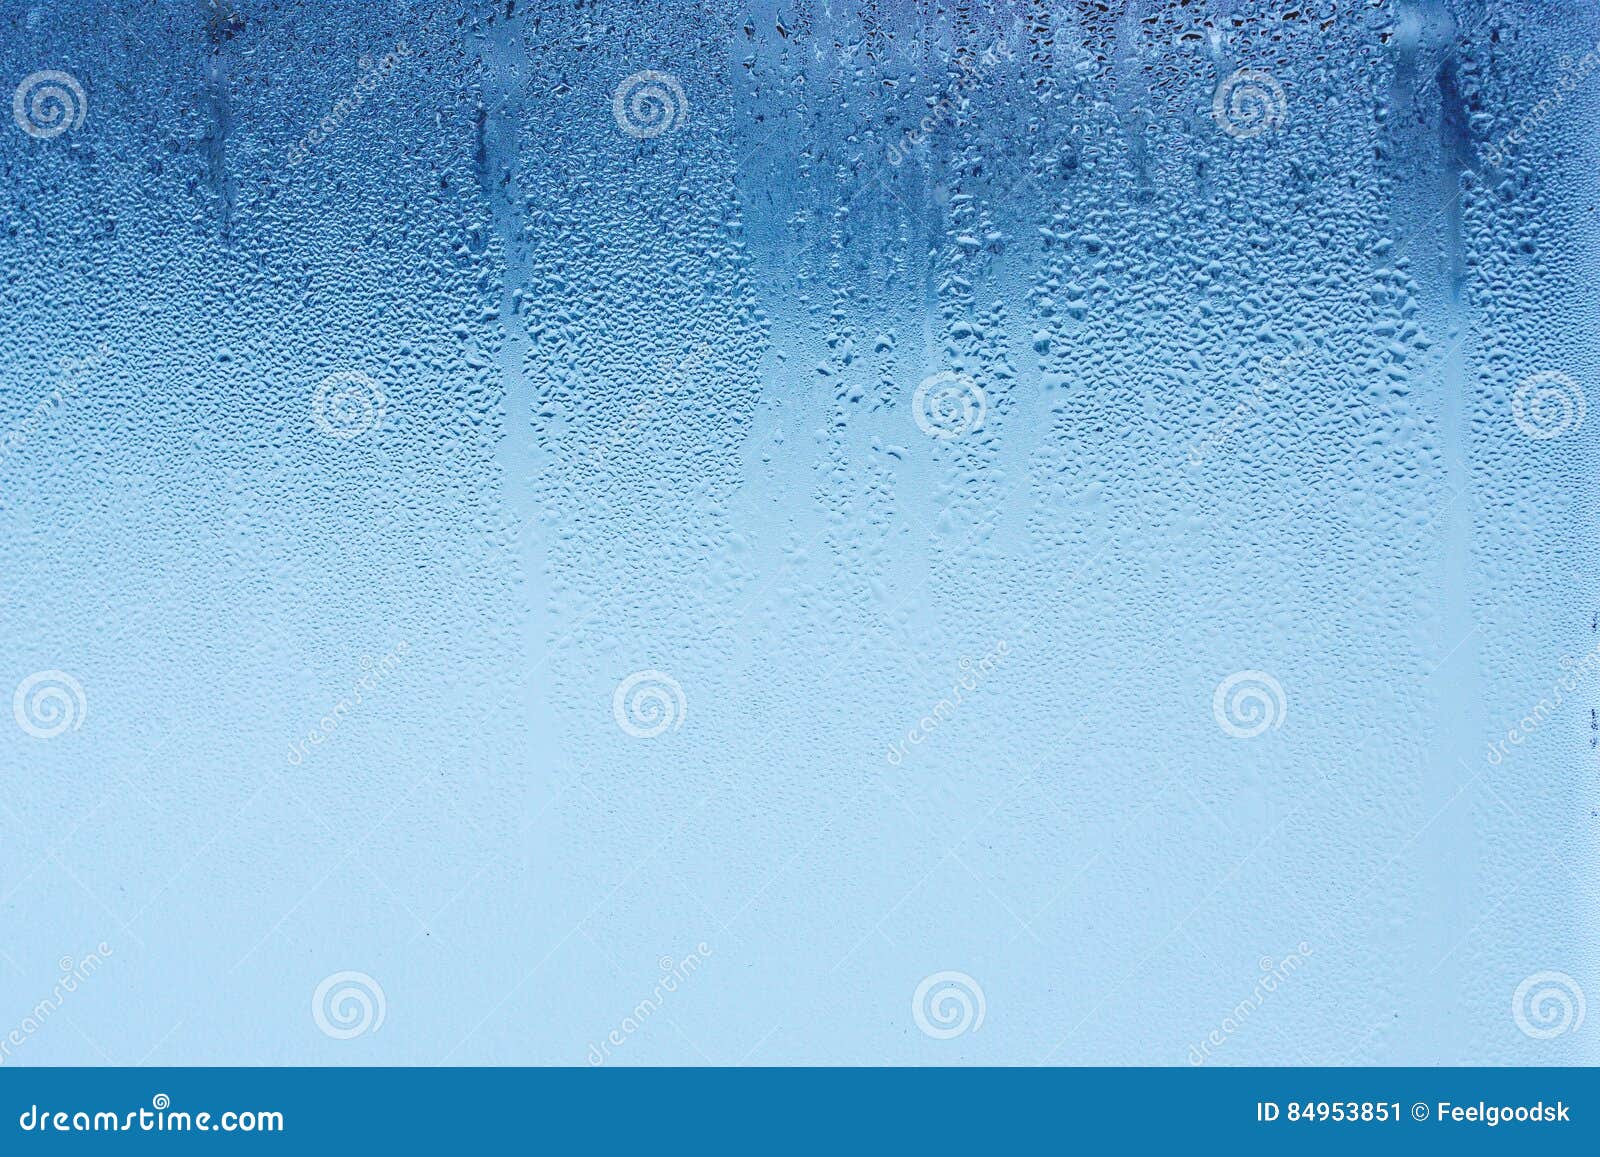 natural water drops on glass, window glass with condensation, strong, high humidity, large drops of water flow down the window, co